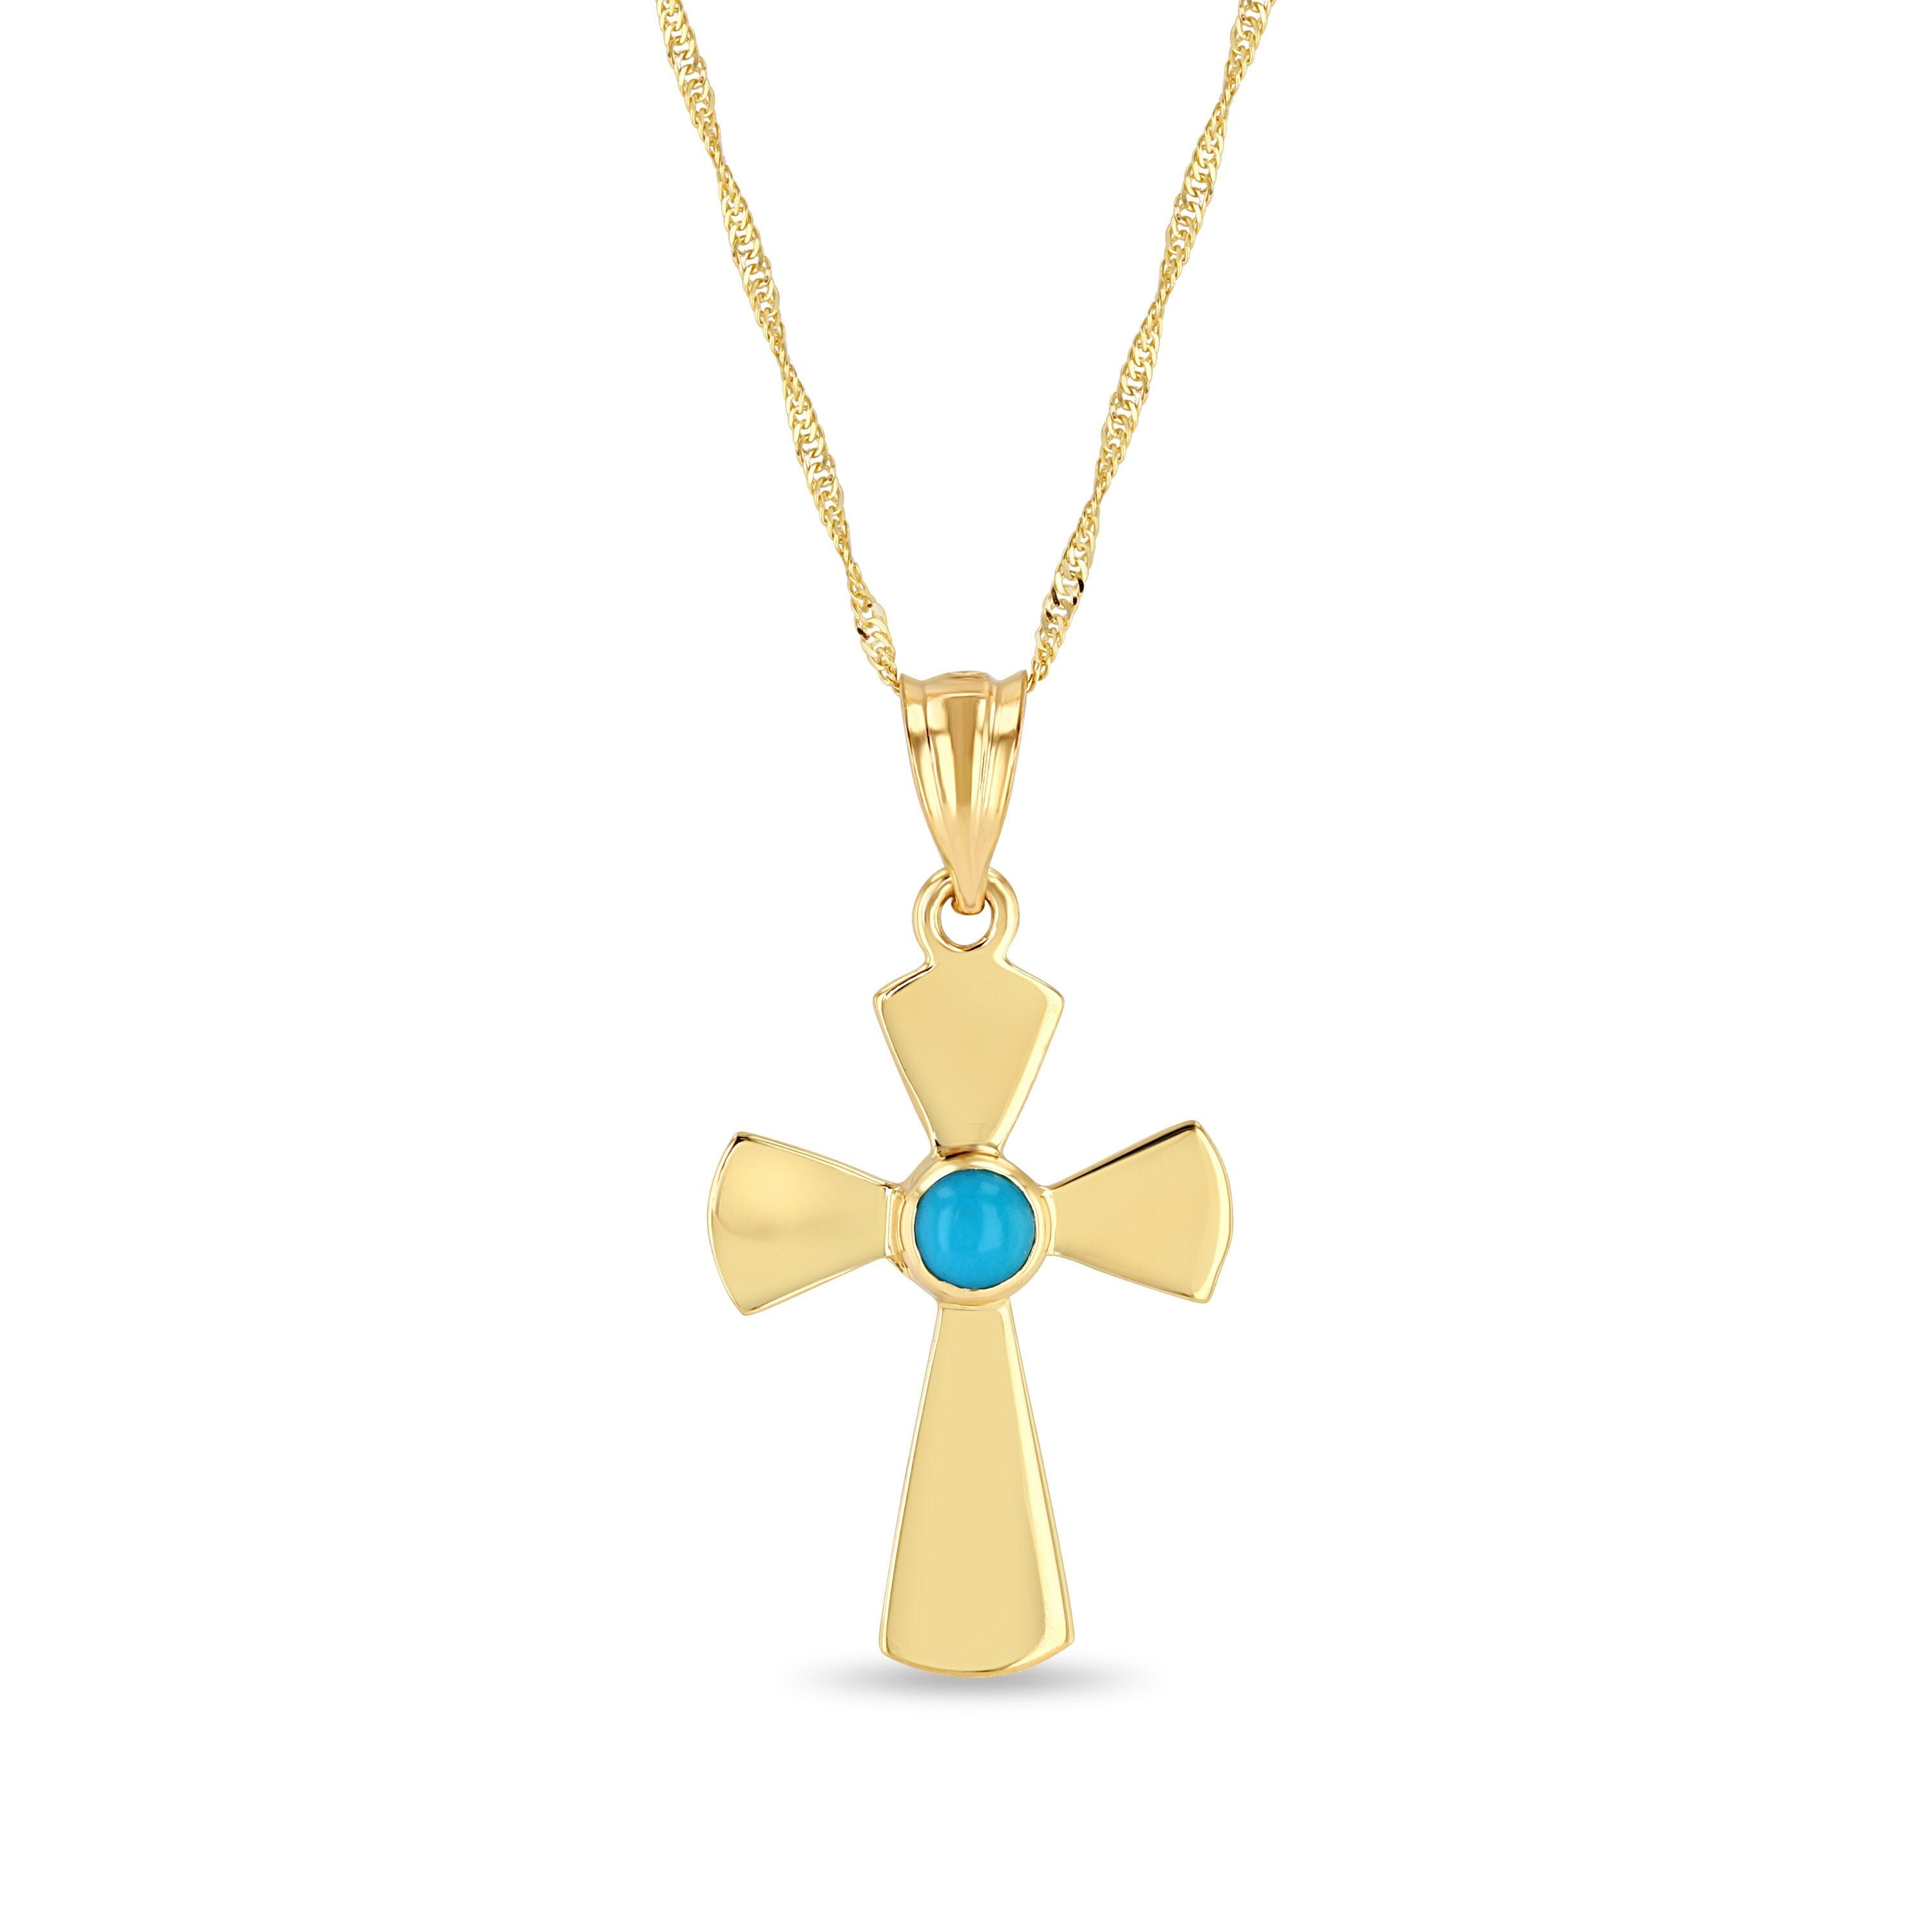 14k solid gold cross necklace with genuine turquoise stone